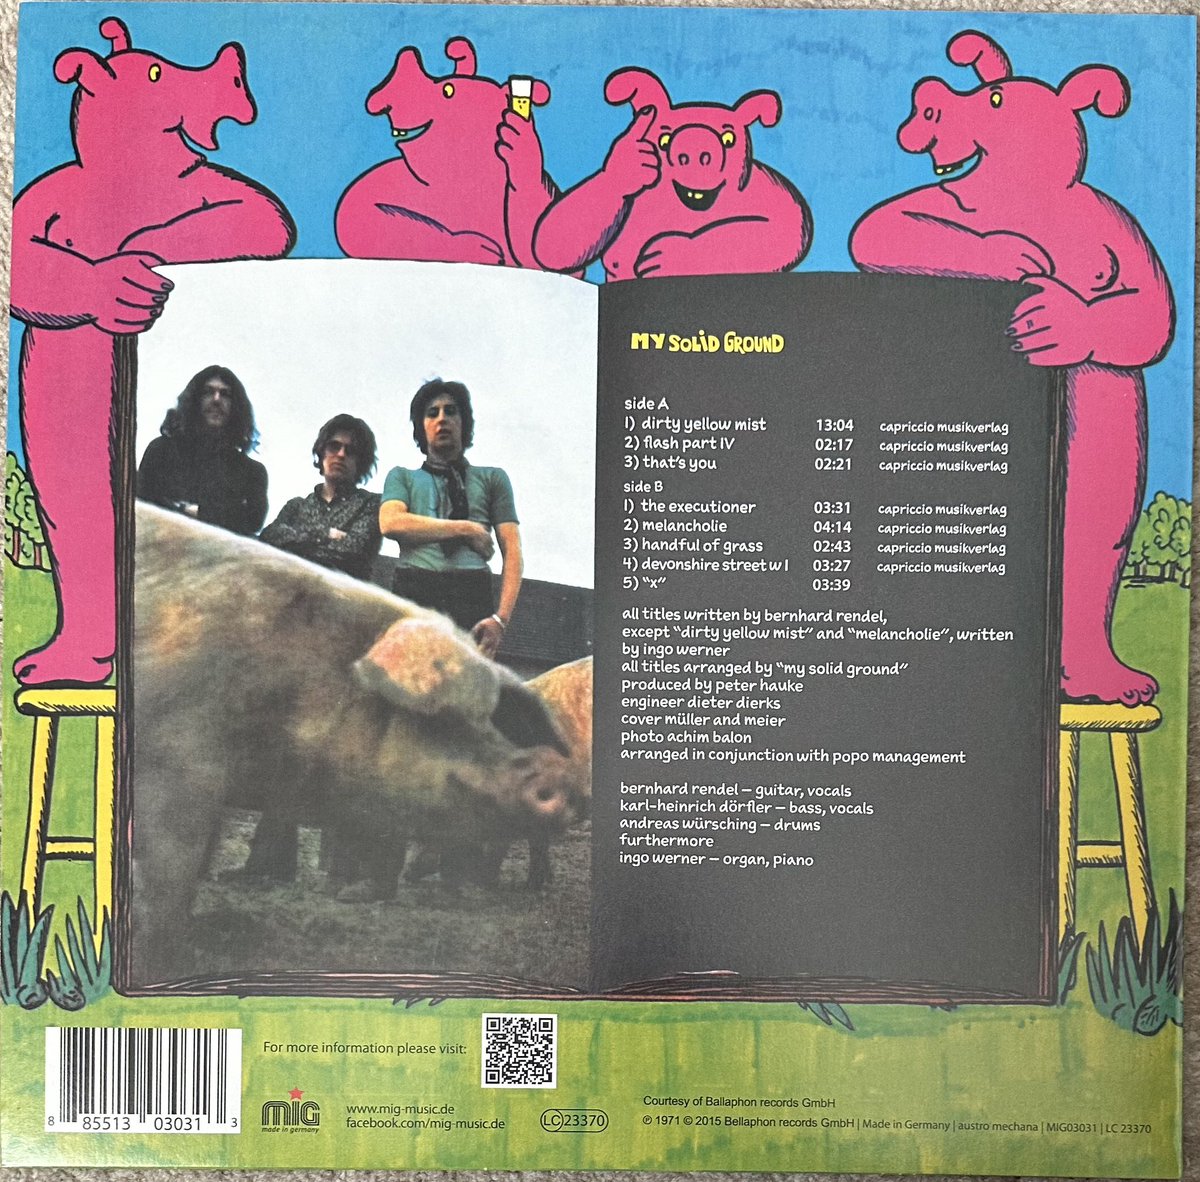 Formed in Rüsselsheim, ‘68, until ‘74 Released 1 album in ‘71 on ‘Bacillus Records’ For some, a Krautrock holy grail… …with unusual spaced-out heavy improvisation, experimental abstract & ferocious riffs, ambient semi-acoustic trips & chanting… Highlight of German psych…